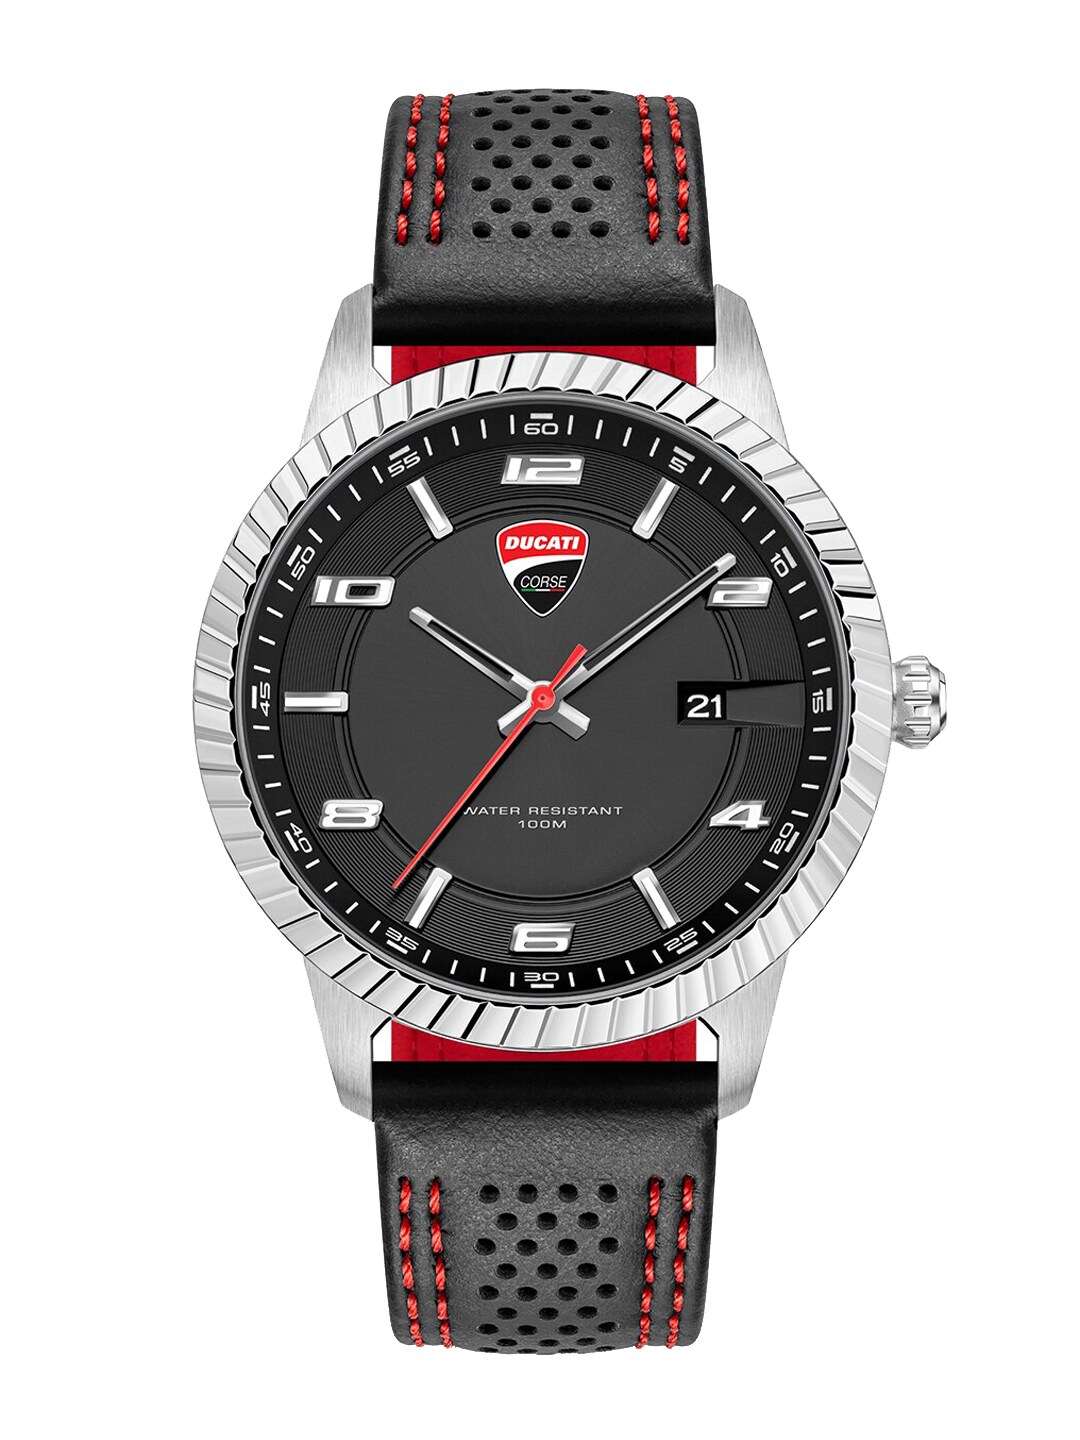 Podio for Watch DTWGB0000402 - Analog Men DUCATI